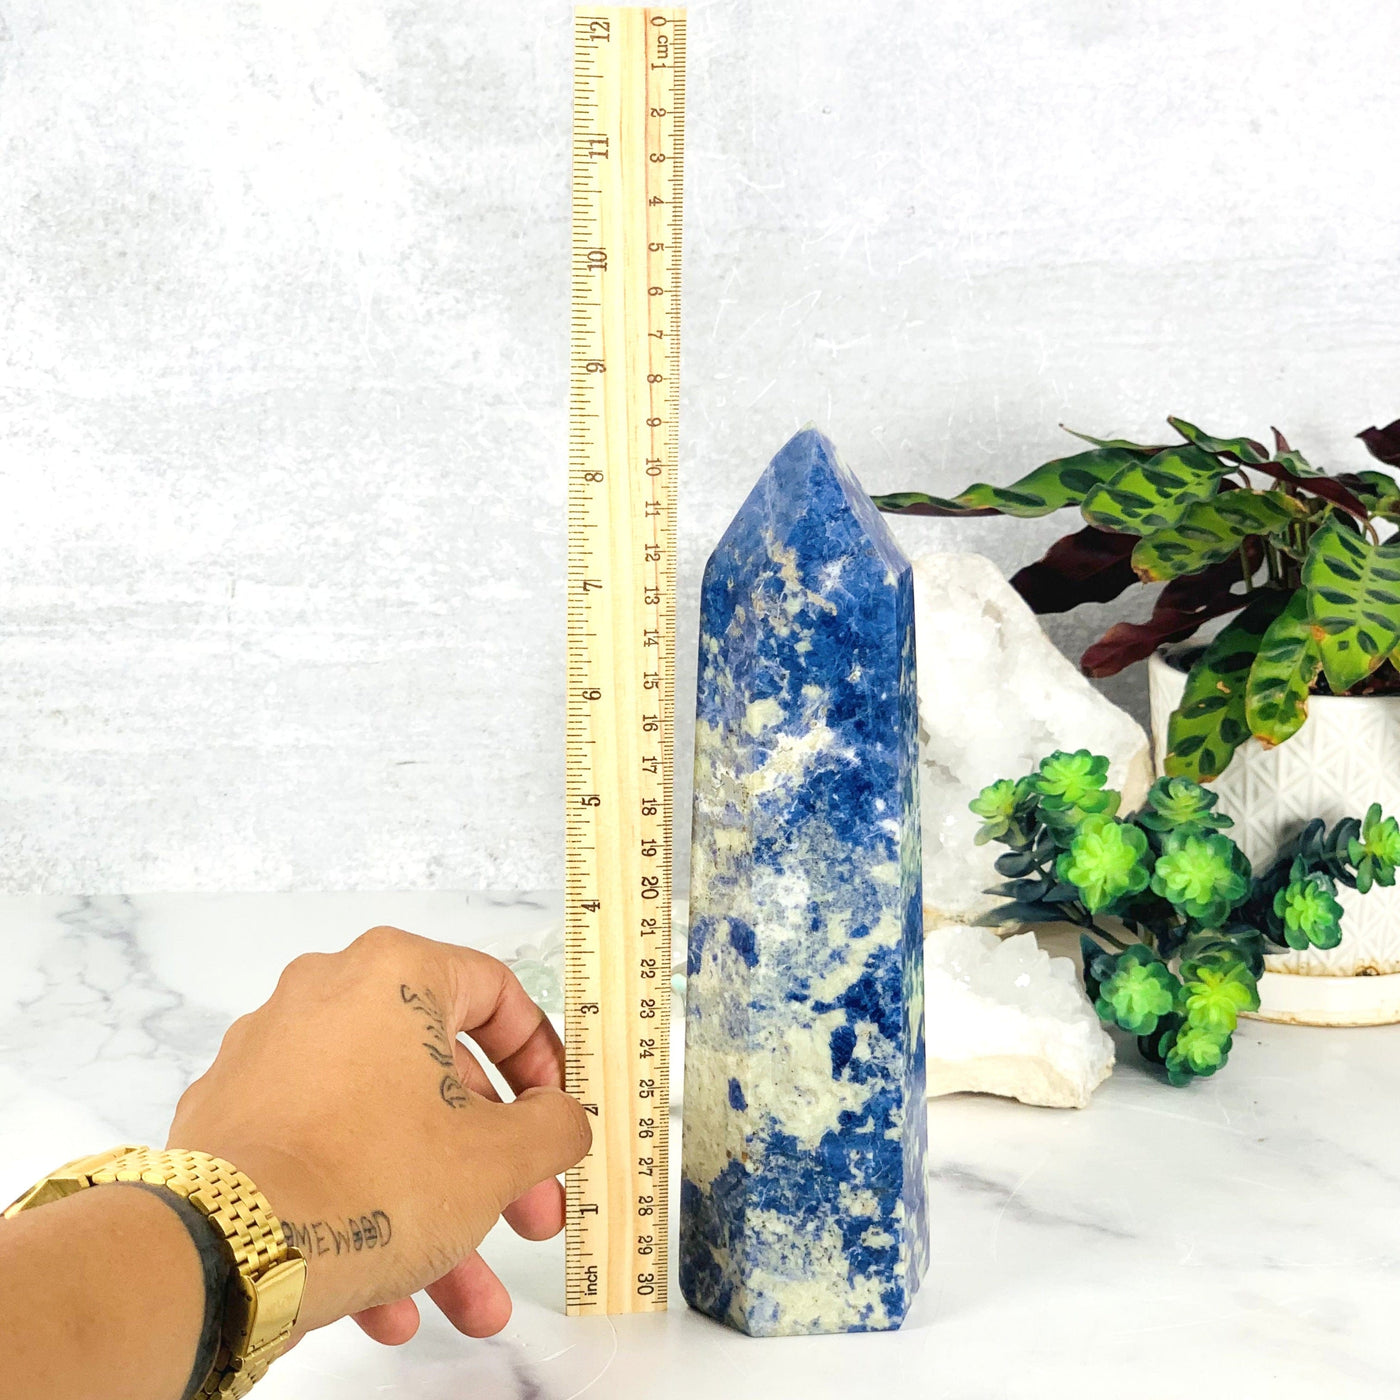 Ruler comparing size to the Sodalite Polished Tower Point